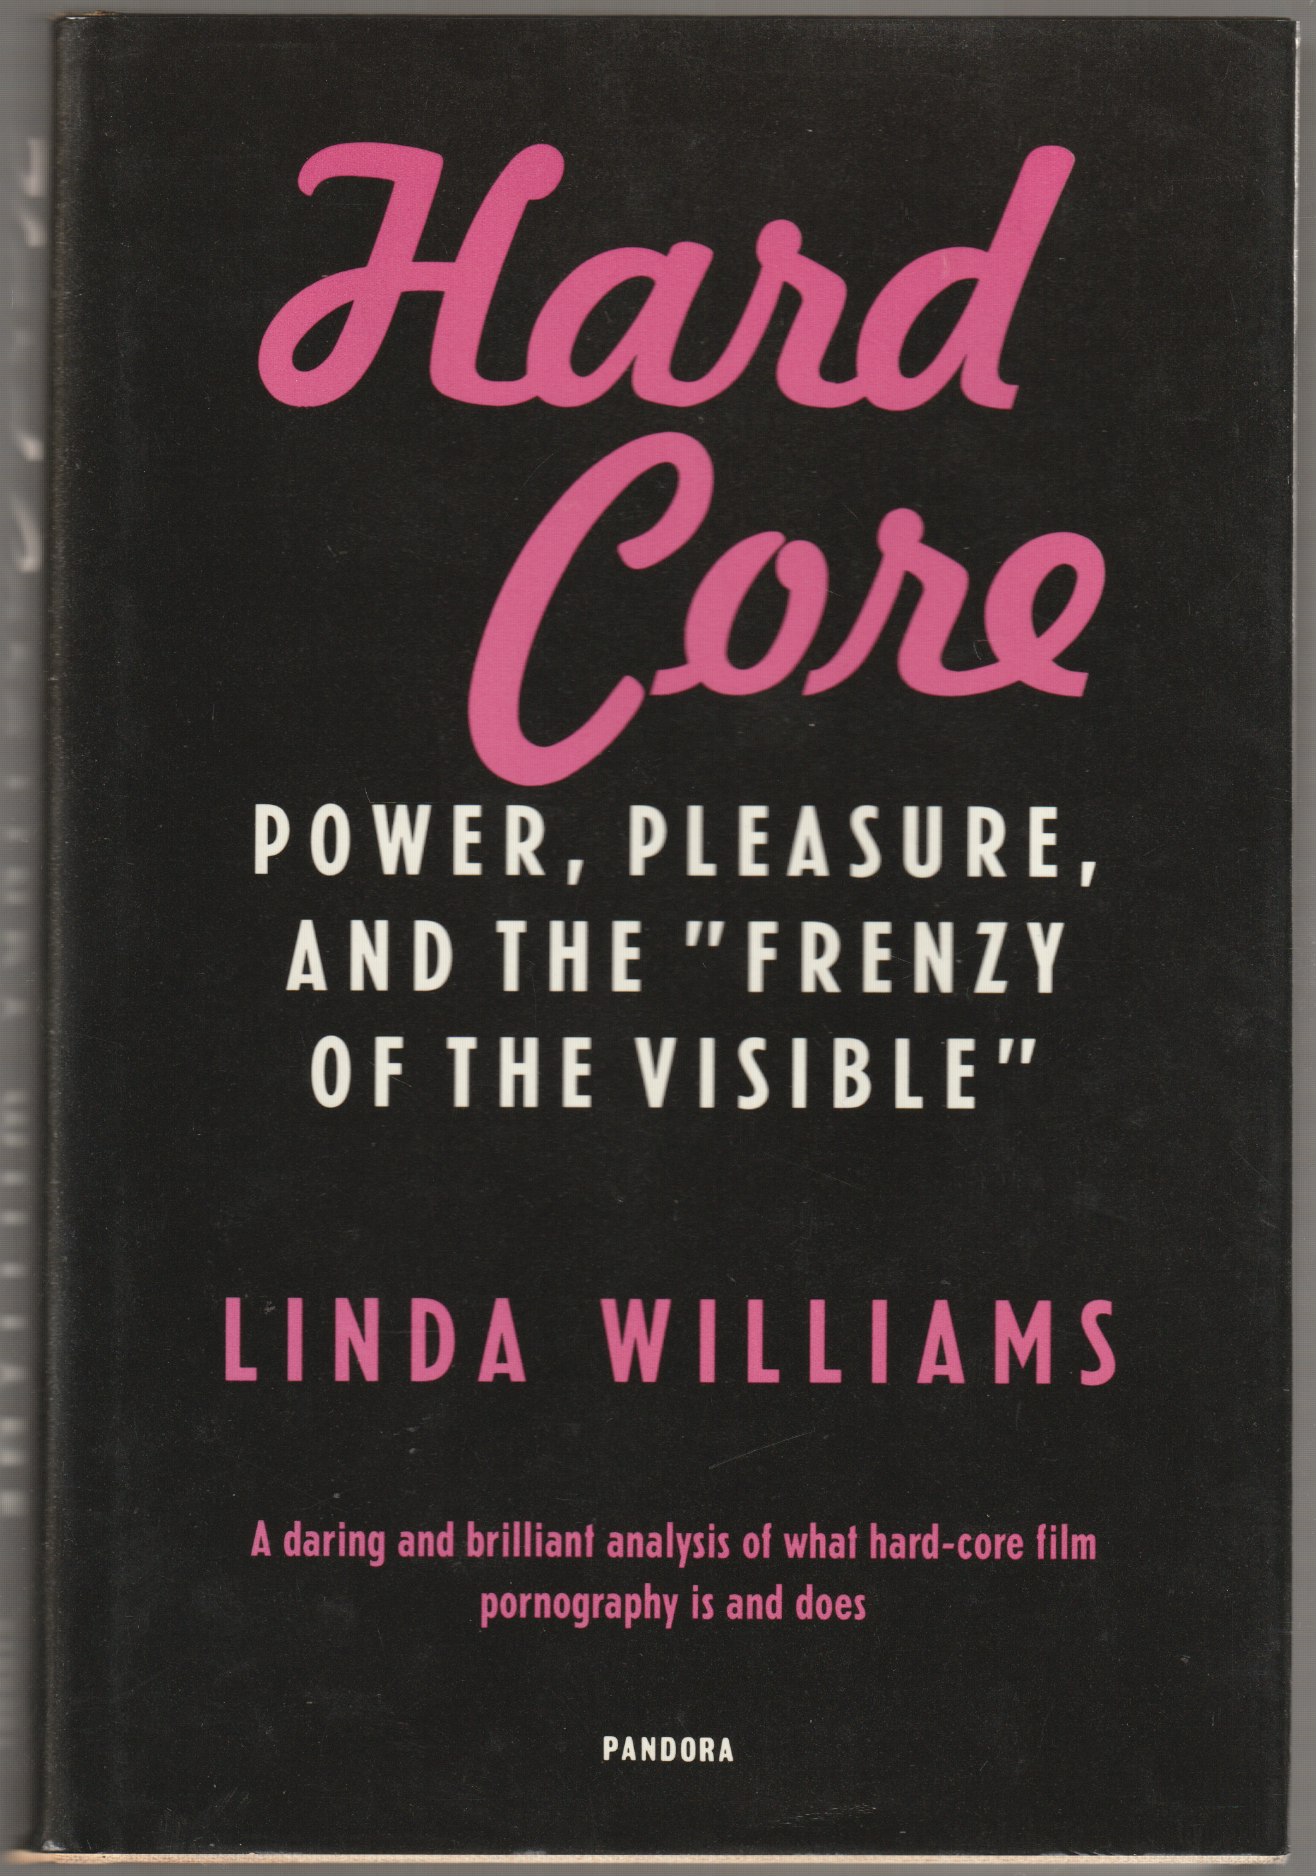 Hard core : power, pleasure, and the frenzy of the visible.